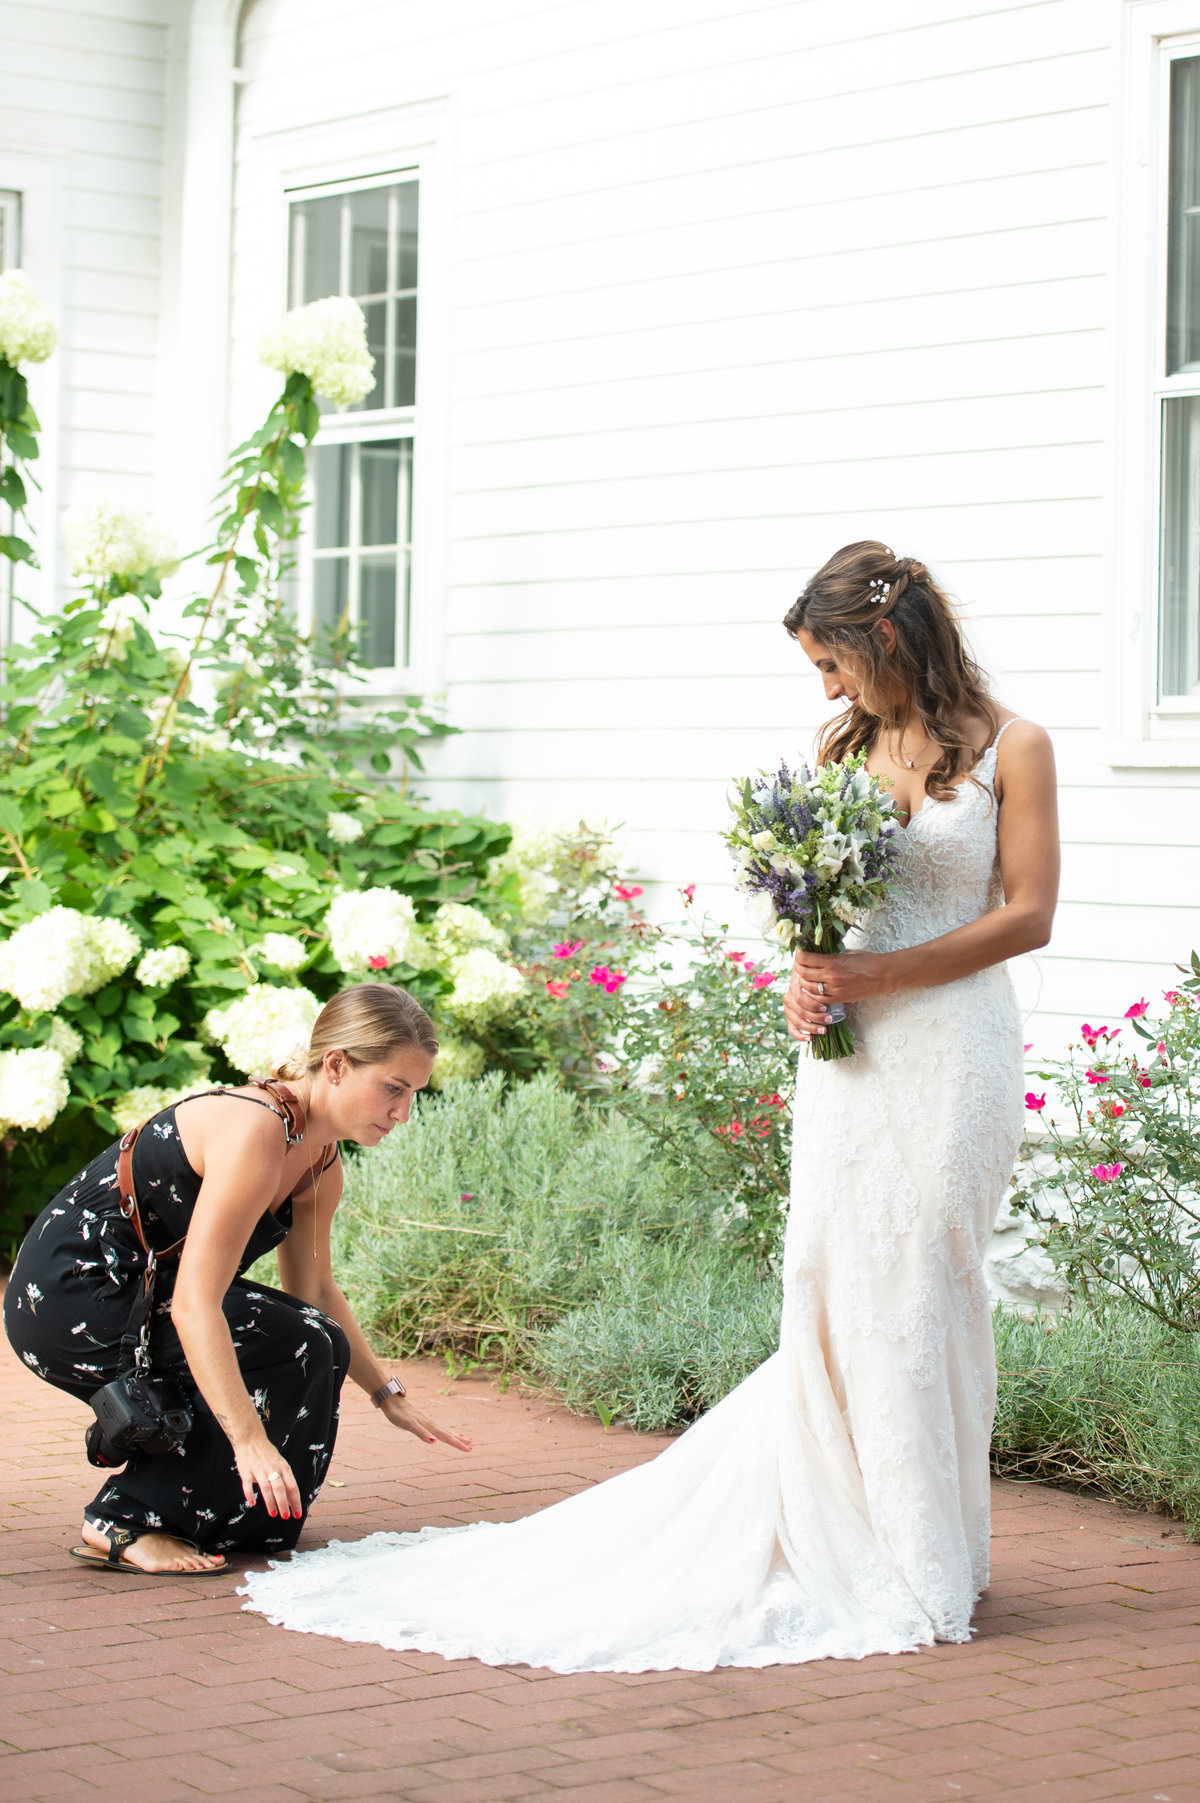 Ashley Mac Photographs - New Jersey Weddings - Behind the Scenes of a Wedding - BTS-40